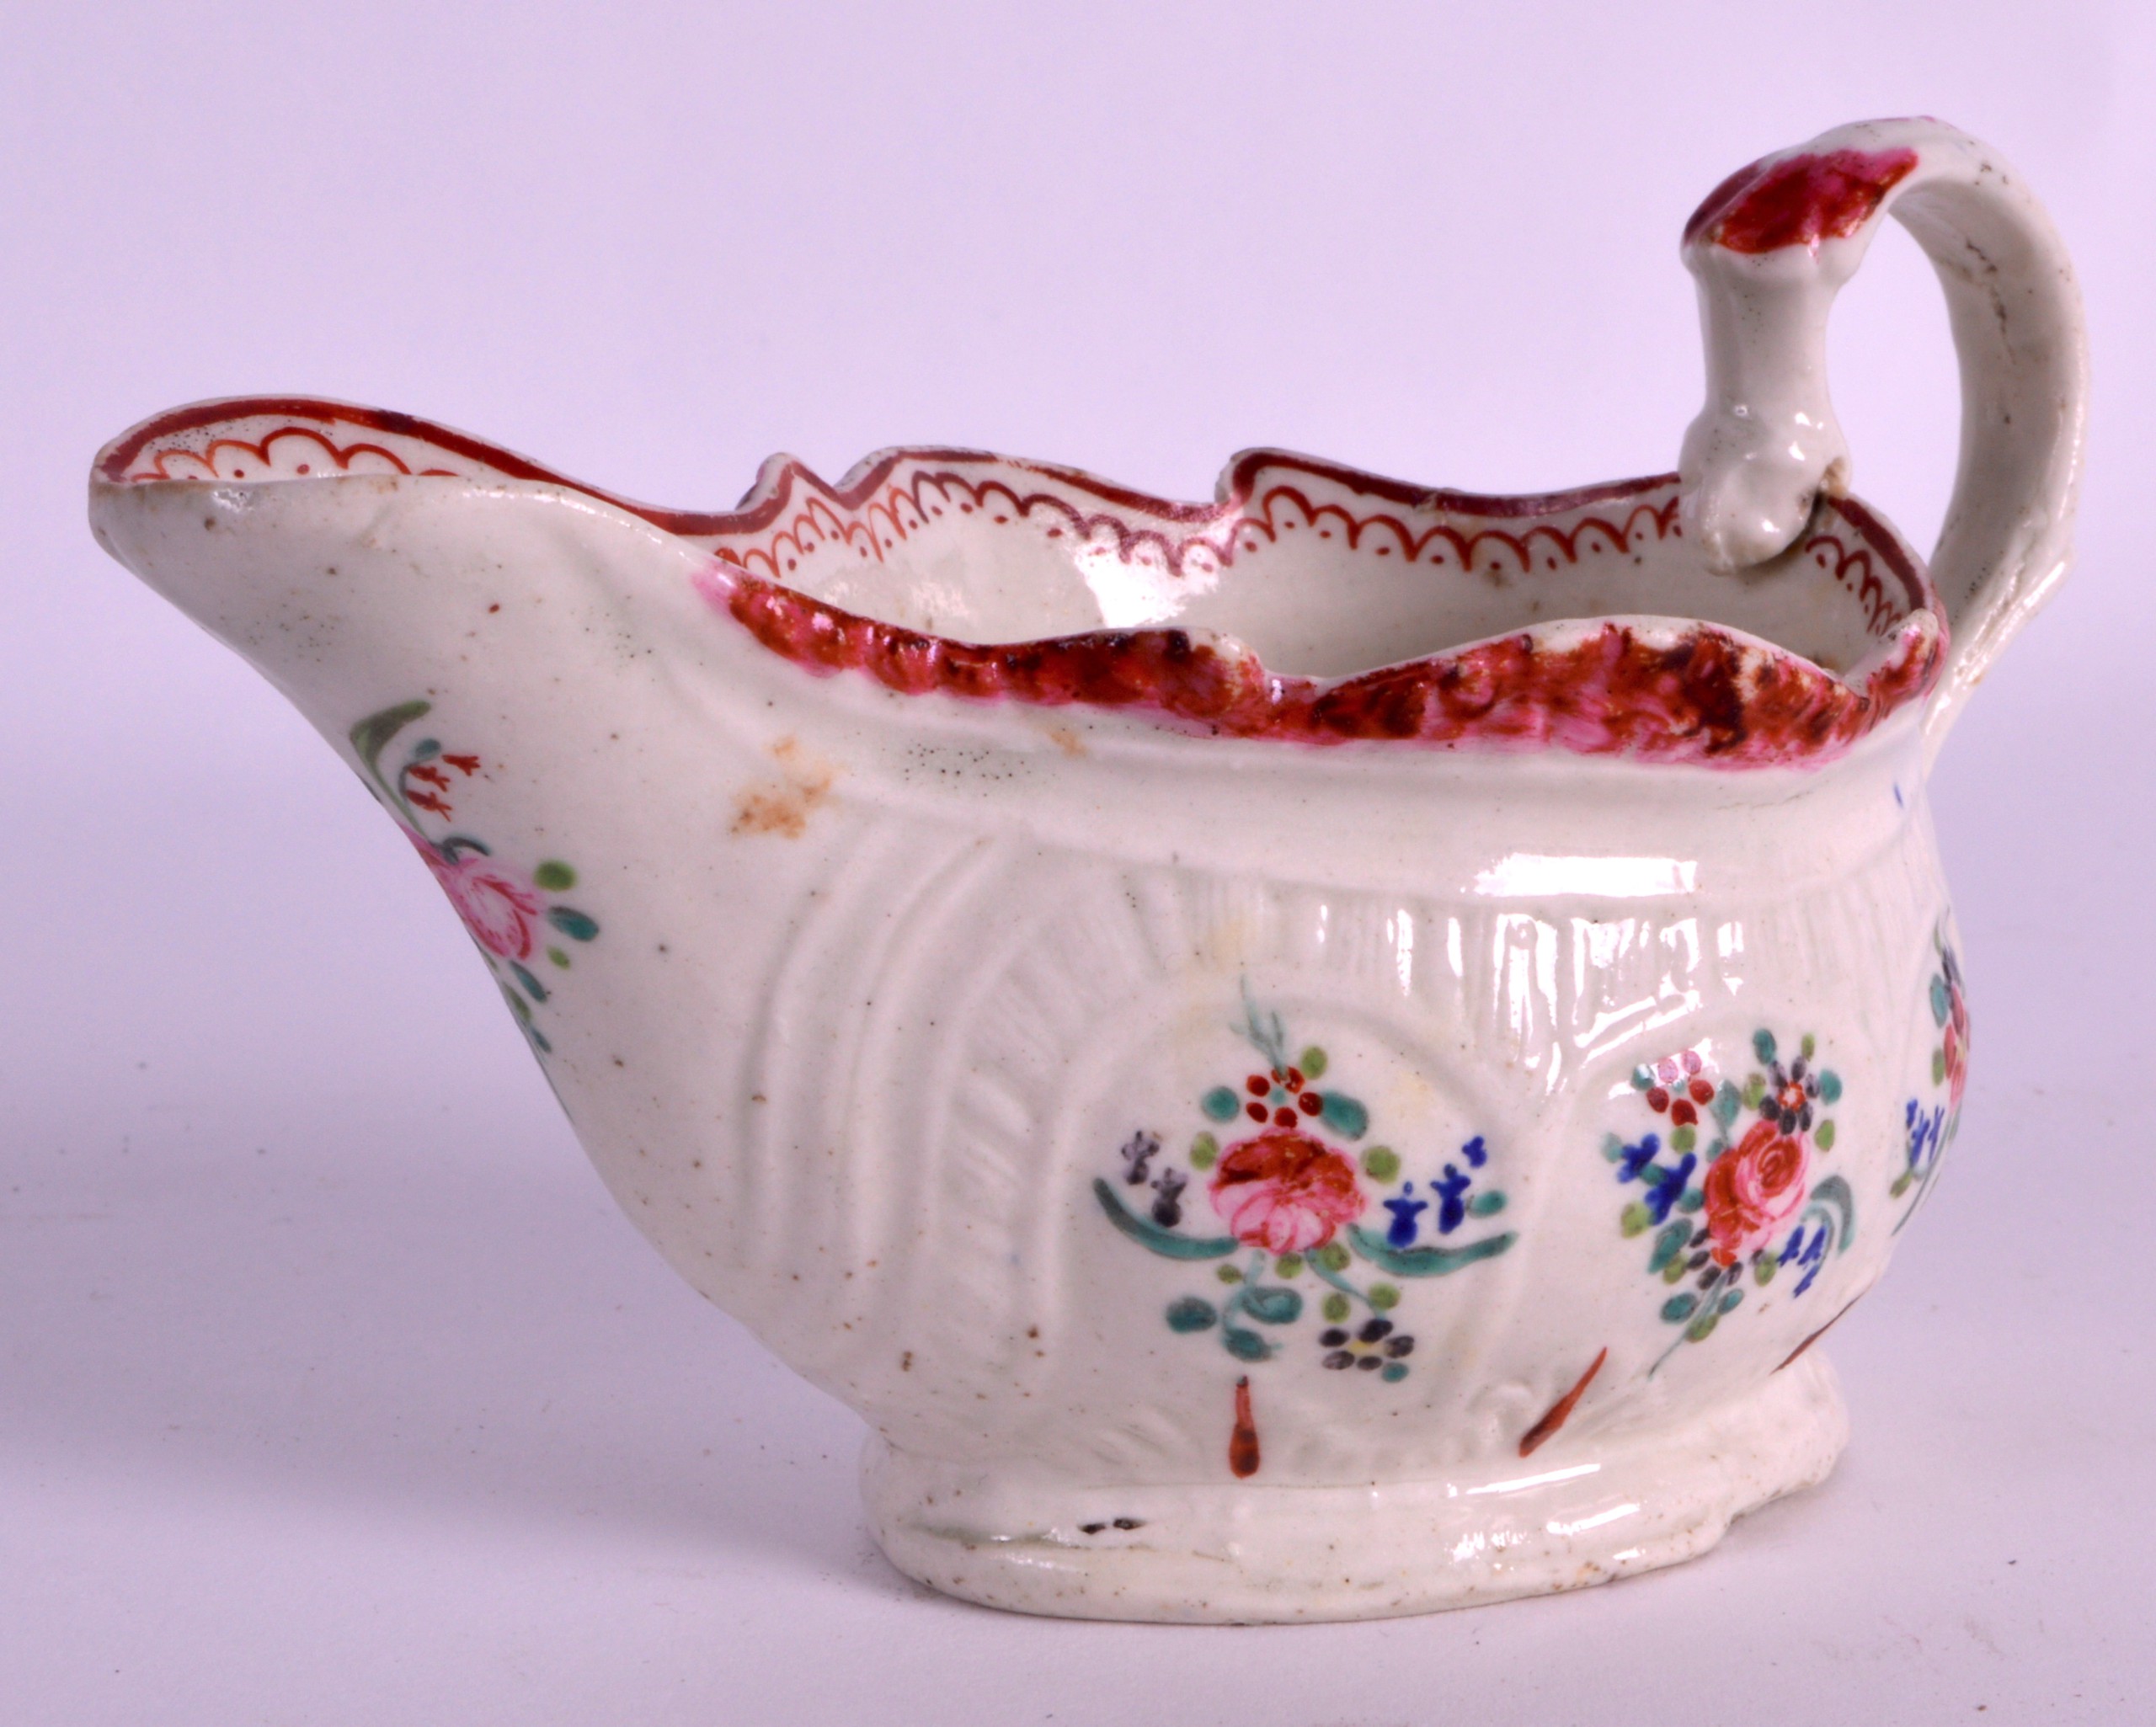 AN UNUSUAL 18TH CENTURY LIVERPOOL CREAMBOAT with serpant biting handle, painted with flowers. 5Ins